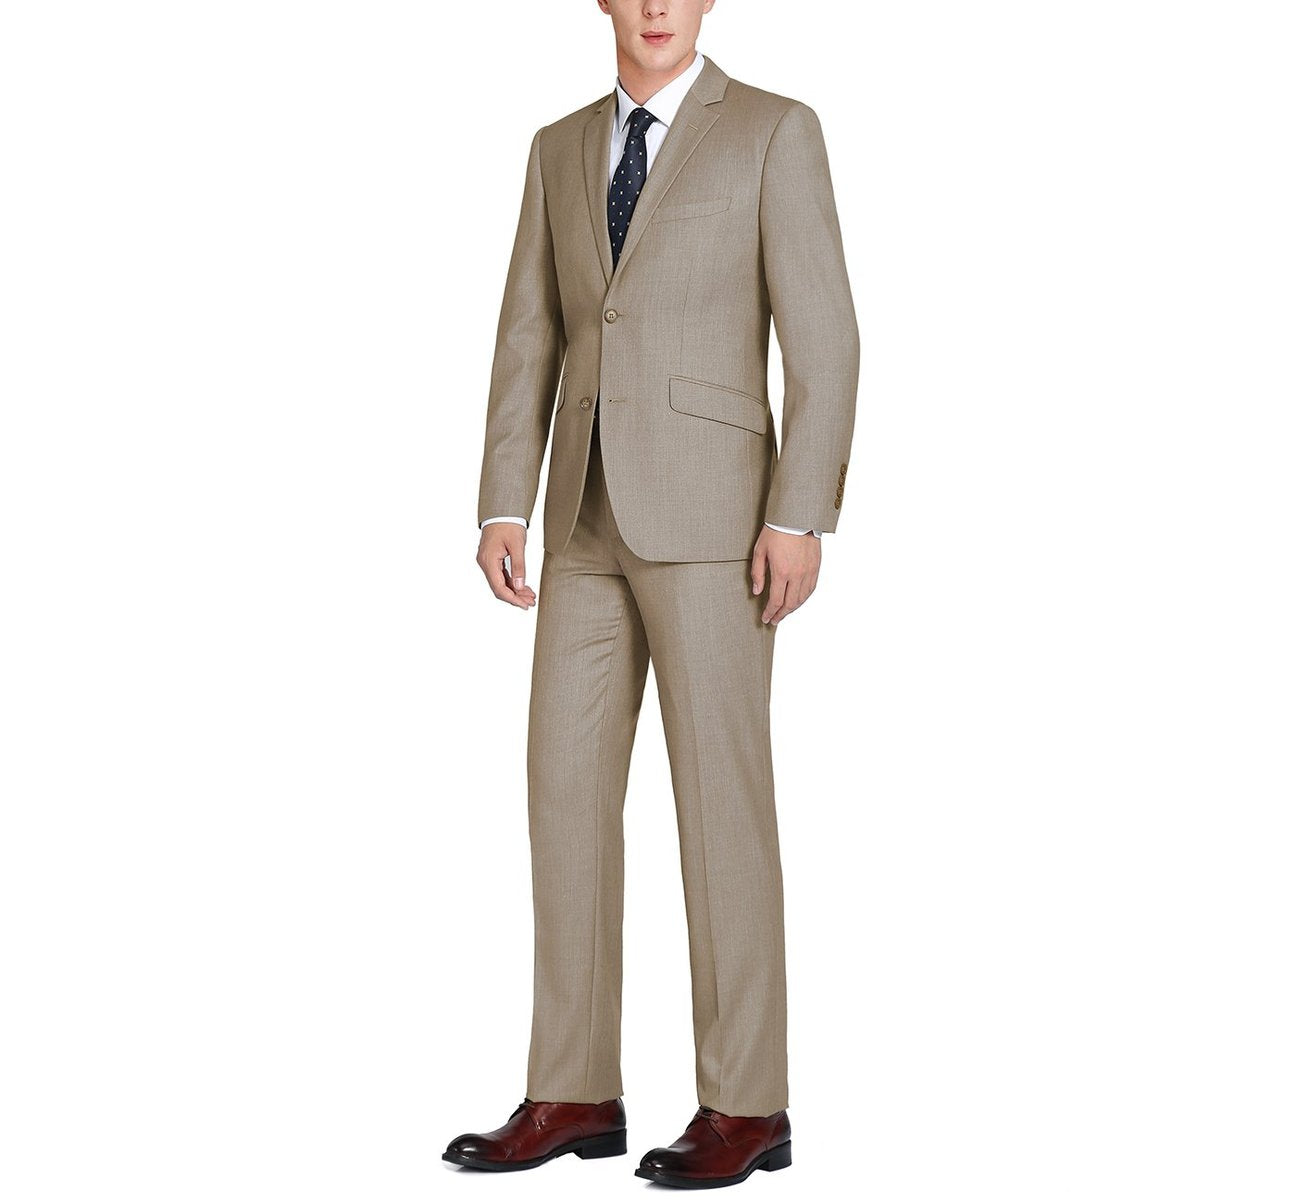 RENOIR 2-Piece Classic Fit Single Breasted 2 Button Suit 202-3